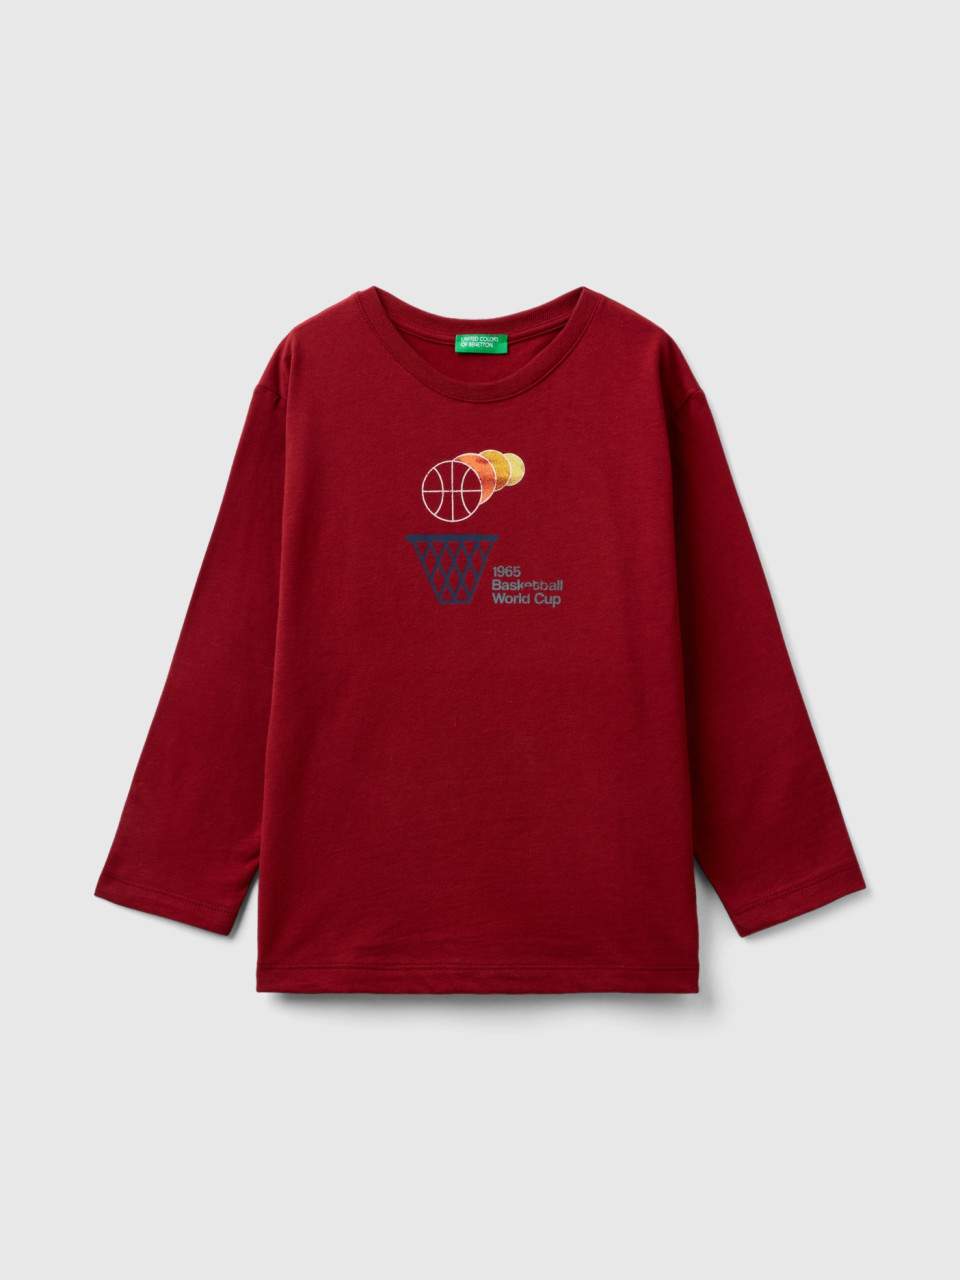 Benetton, Oversized Fit T-shirt With Allover Print, Burgundy, Kids